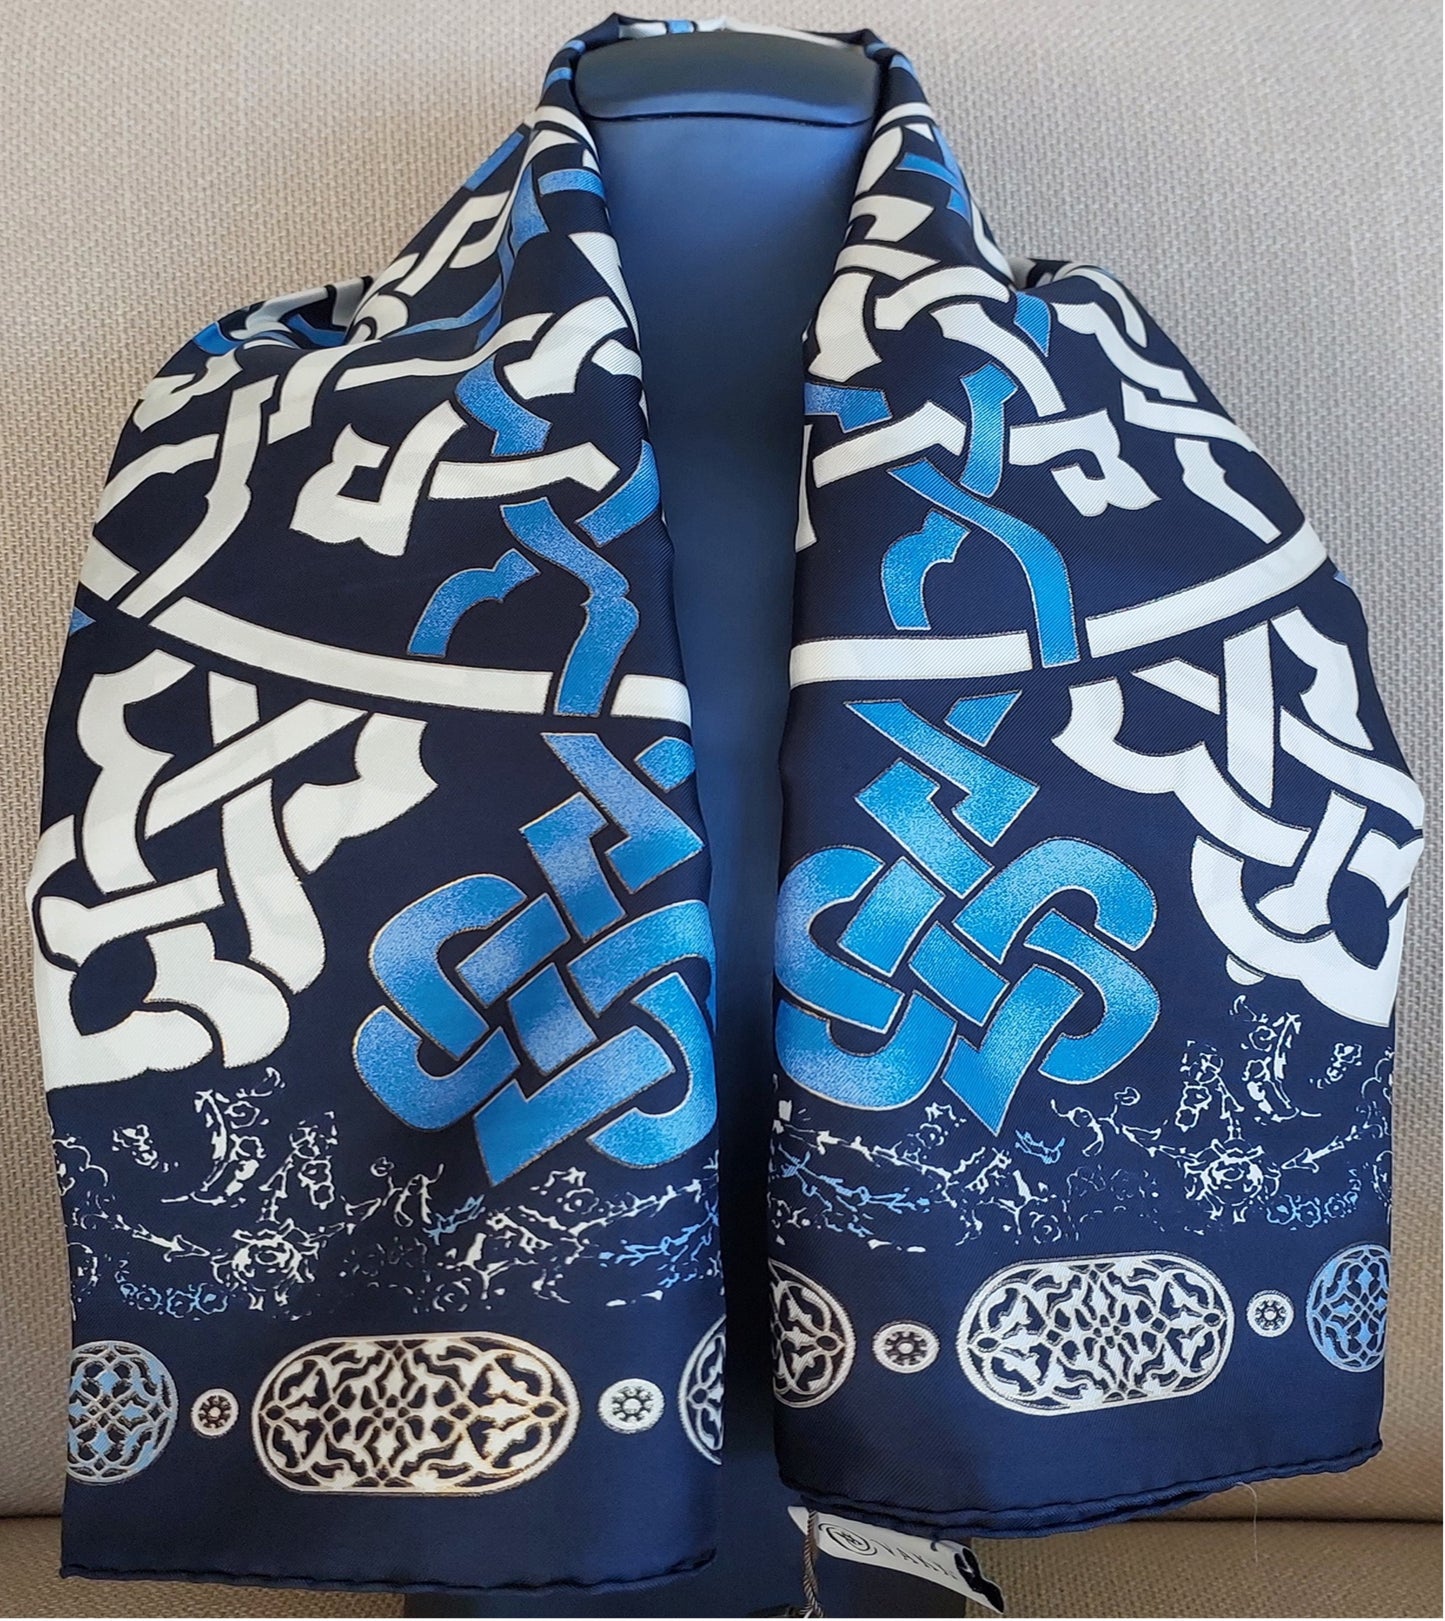 Woman 100% Silk Scarf Geometric design Blue White Navy Blue Colors Hand rolled stitch Great Gift for her in a beautiful box